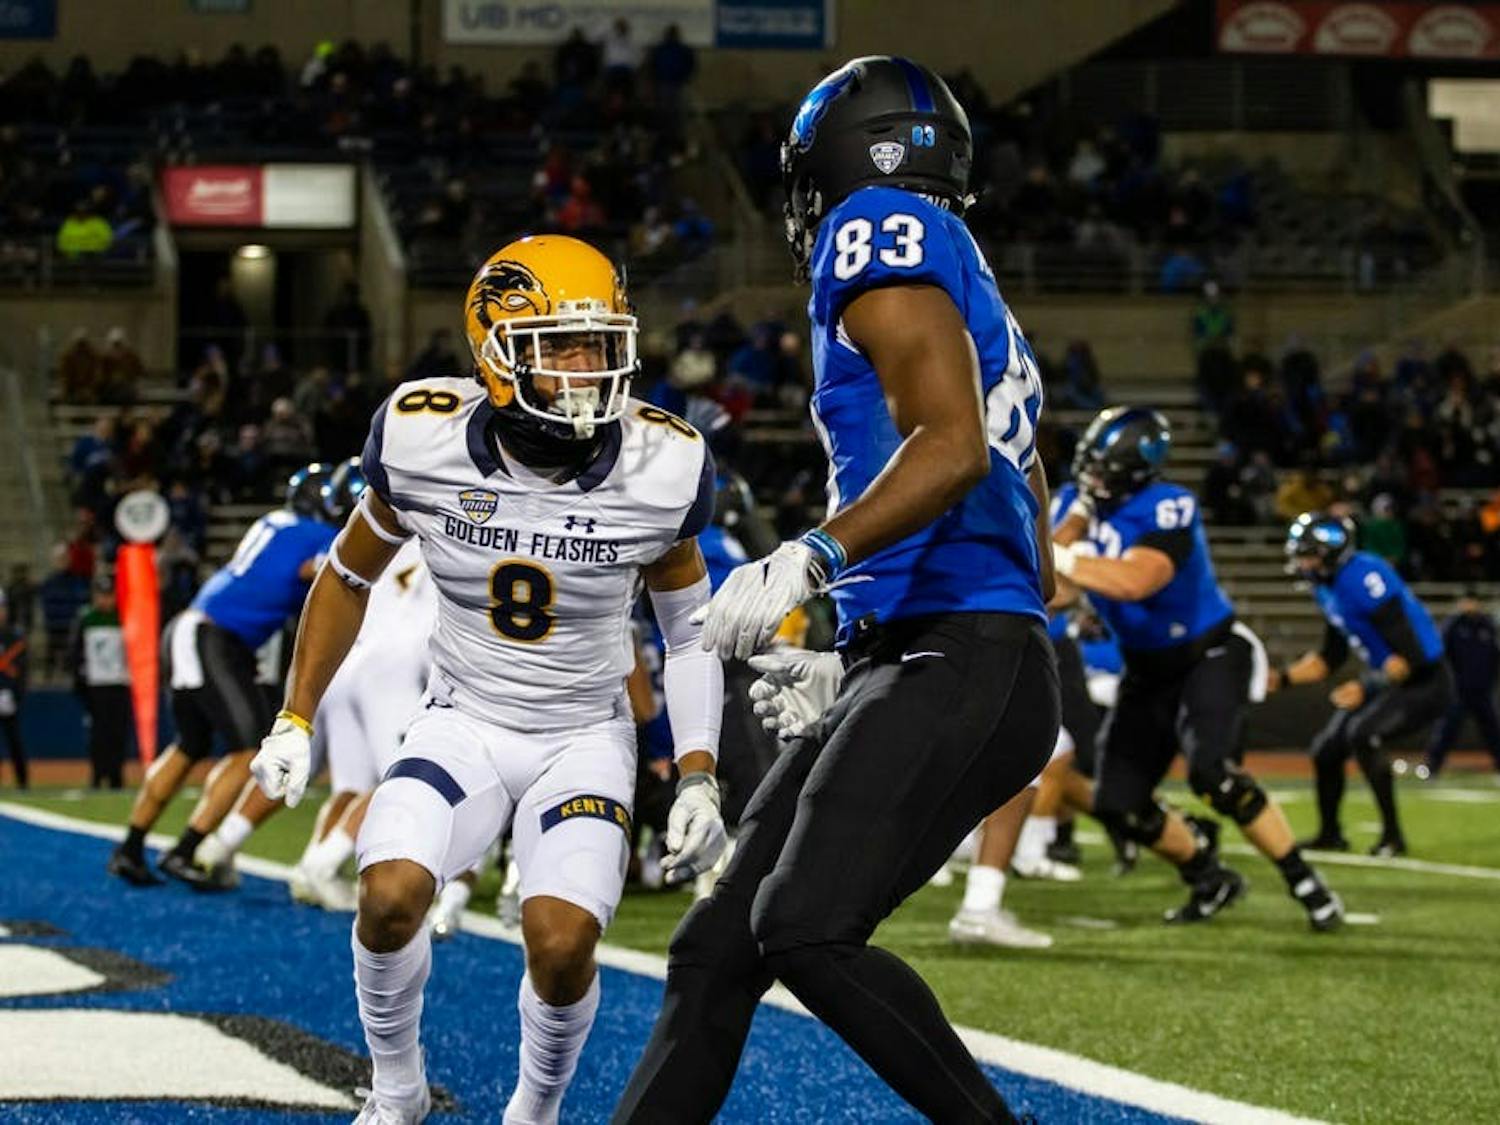 Former UB wide receiver Anthony Johnson creates space in the end zone in a regular-season game on Nov. 6, 2018.